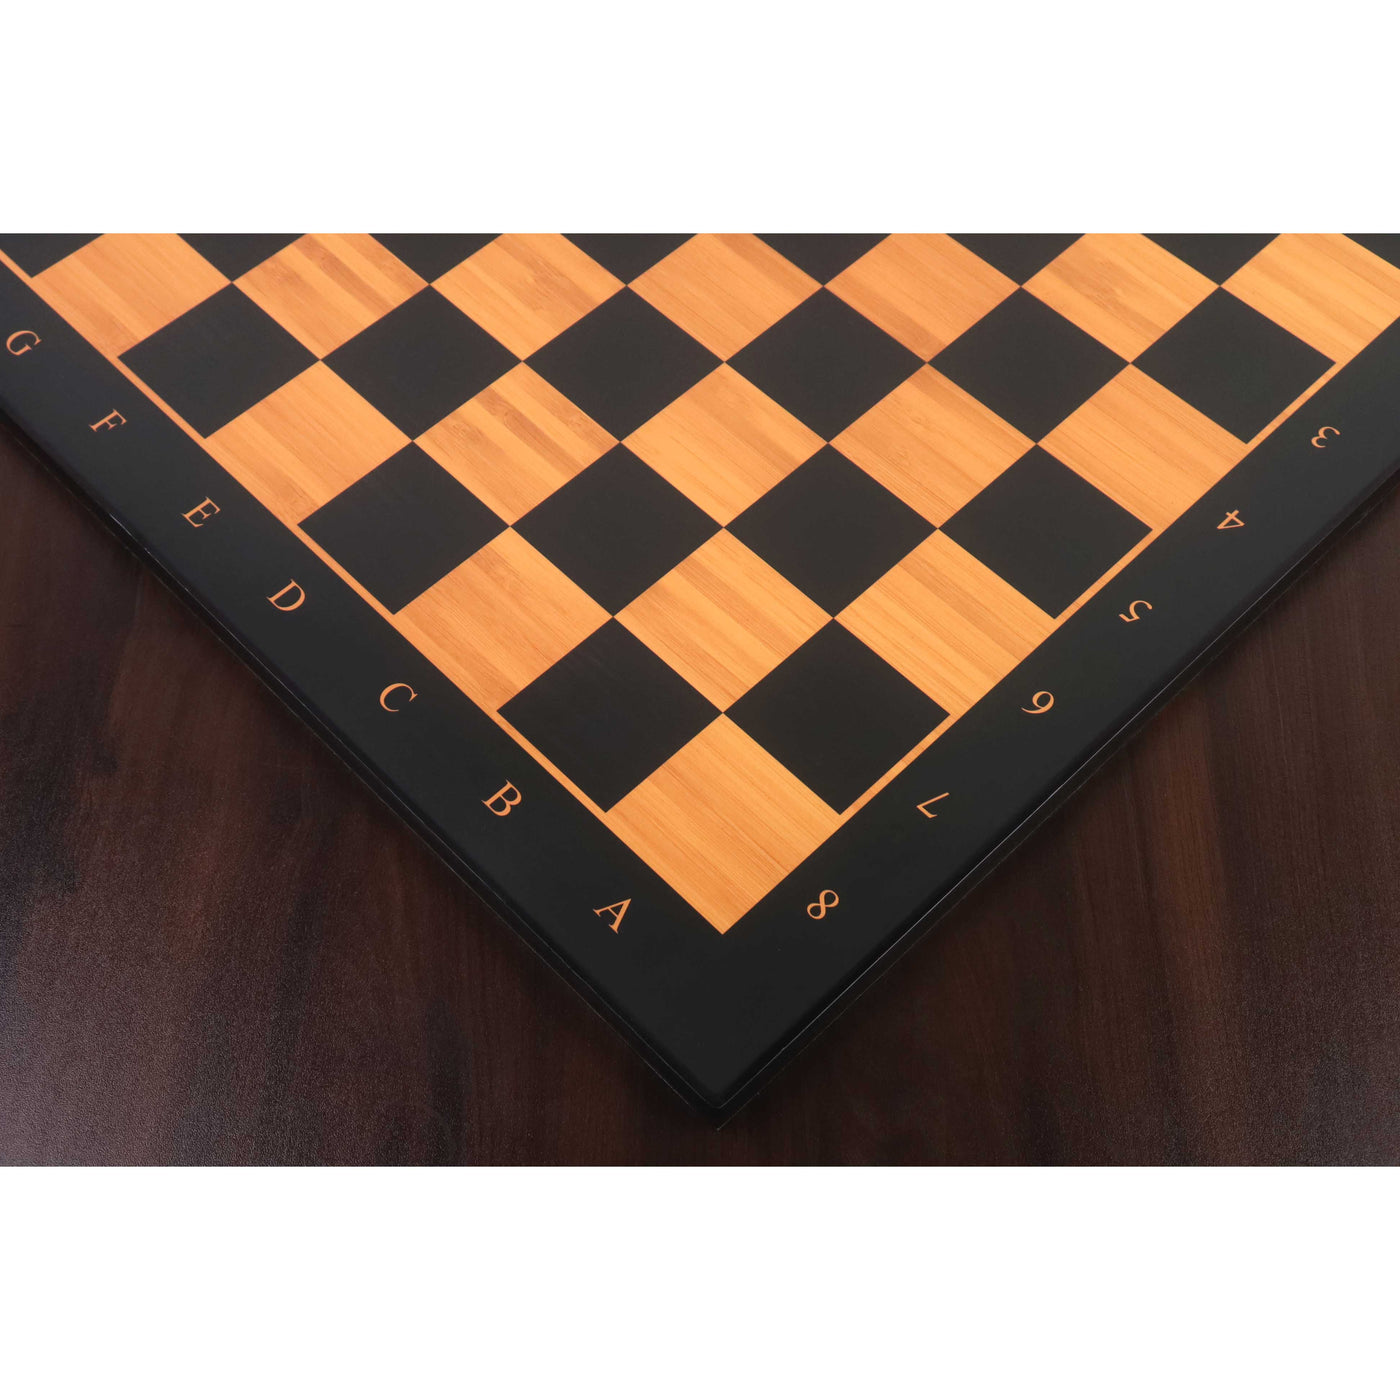 Slightly Imperfect 21" Wooden Printed Chess Board with Notations - Antique Boxwood & Ebony - 55mm square - Matt Finish